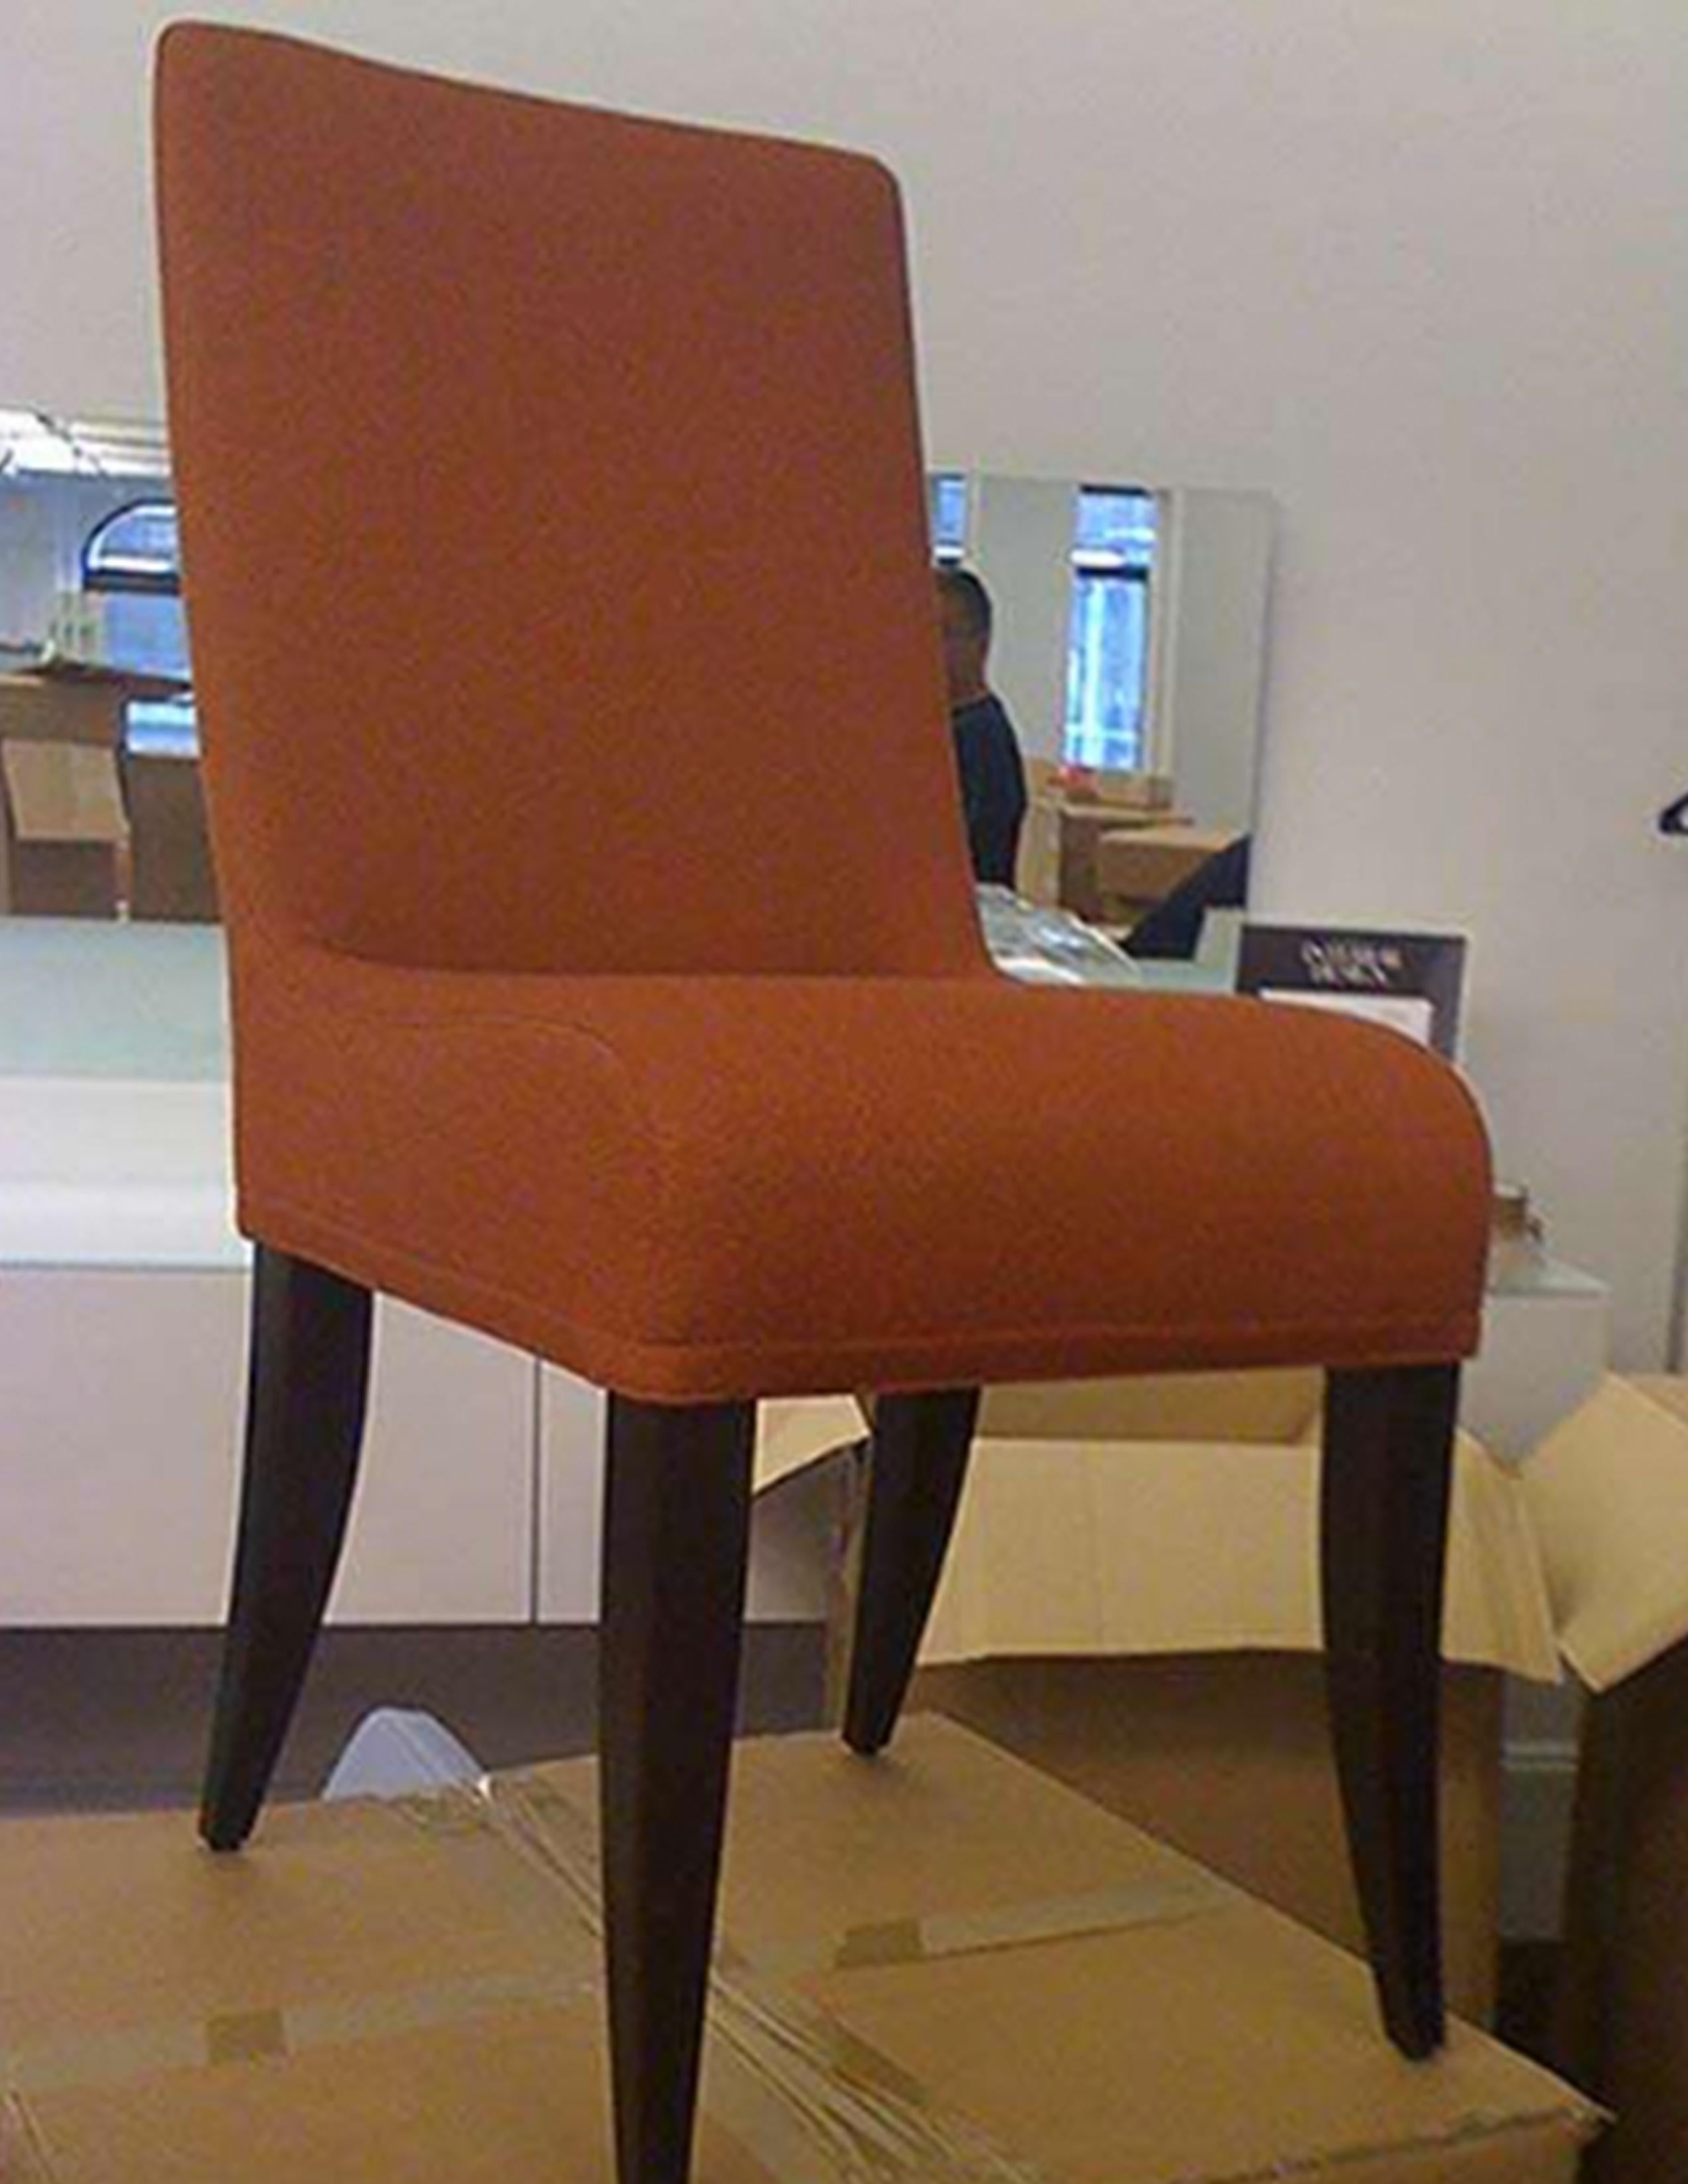 Isis dining chair
(4) available
Fabric: Rust color
Legs: Wenge stain
Measures: 16.9